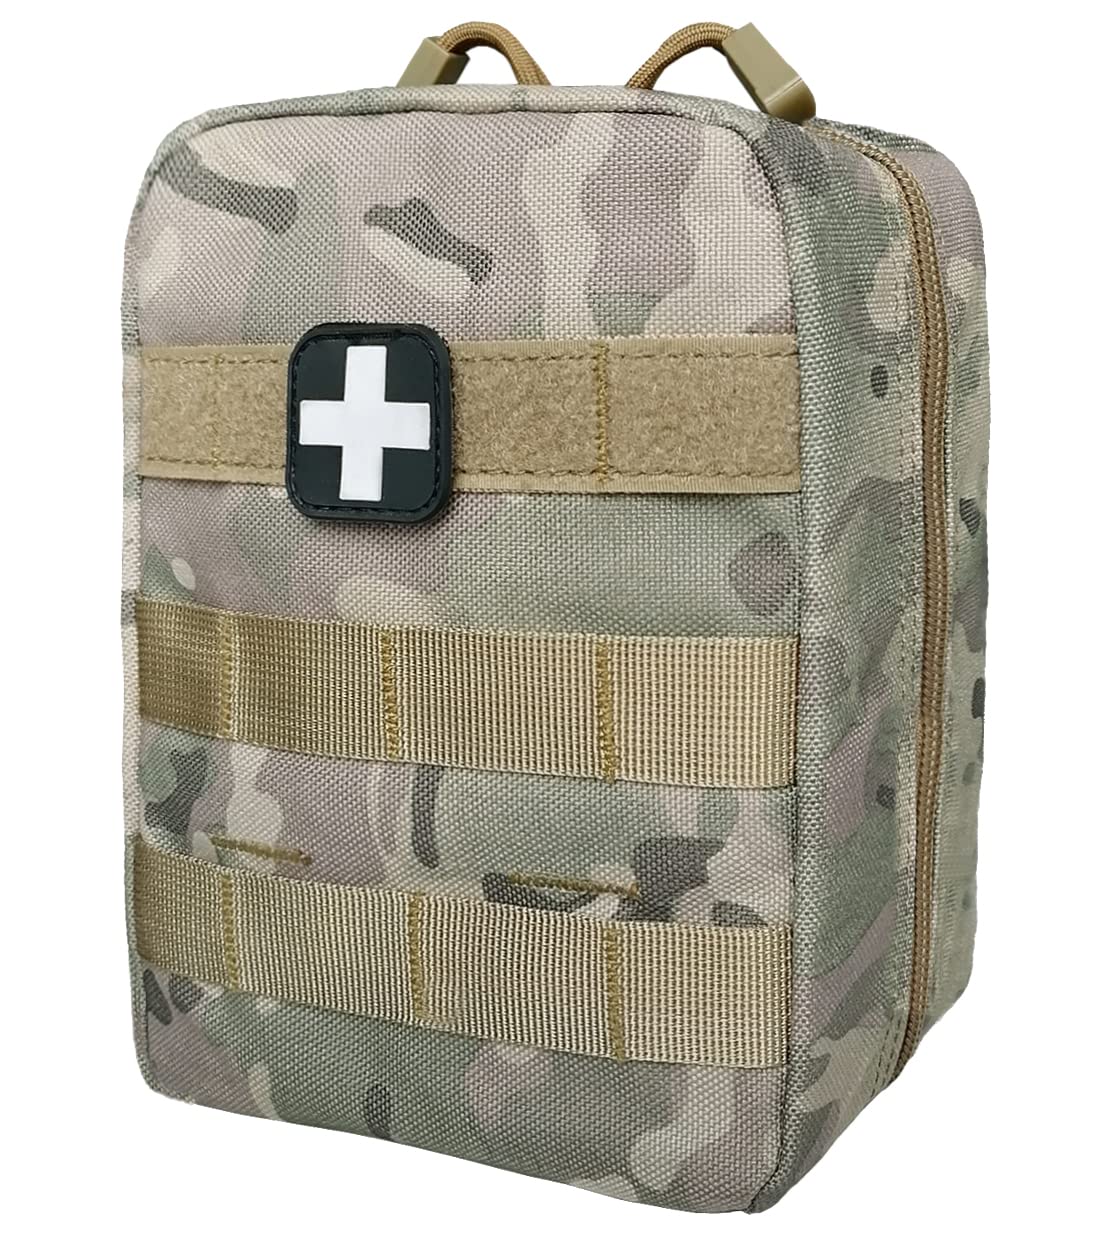 First Aid Pouch EMT IFAK Medical Pouch, Tactical MOLLE Utility Pouch Cp